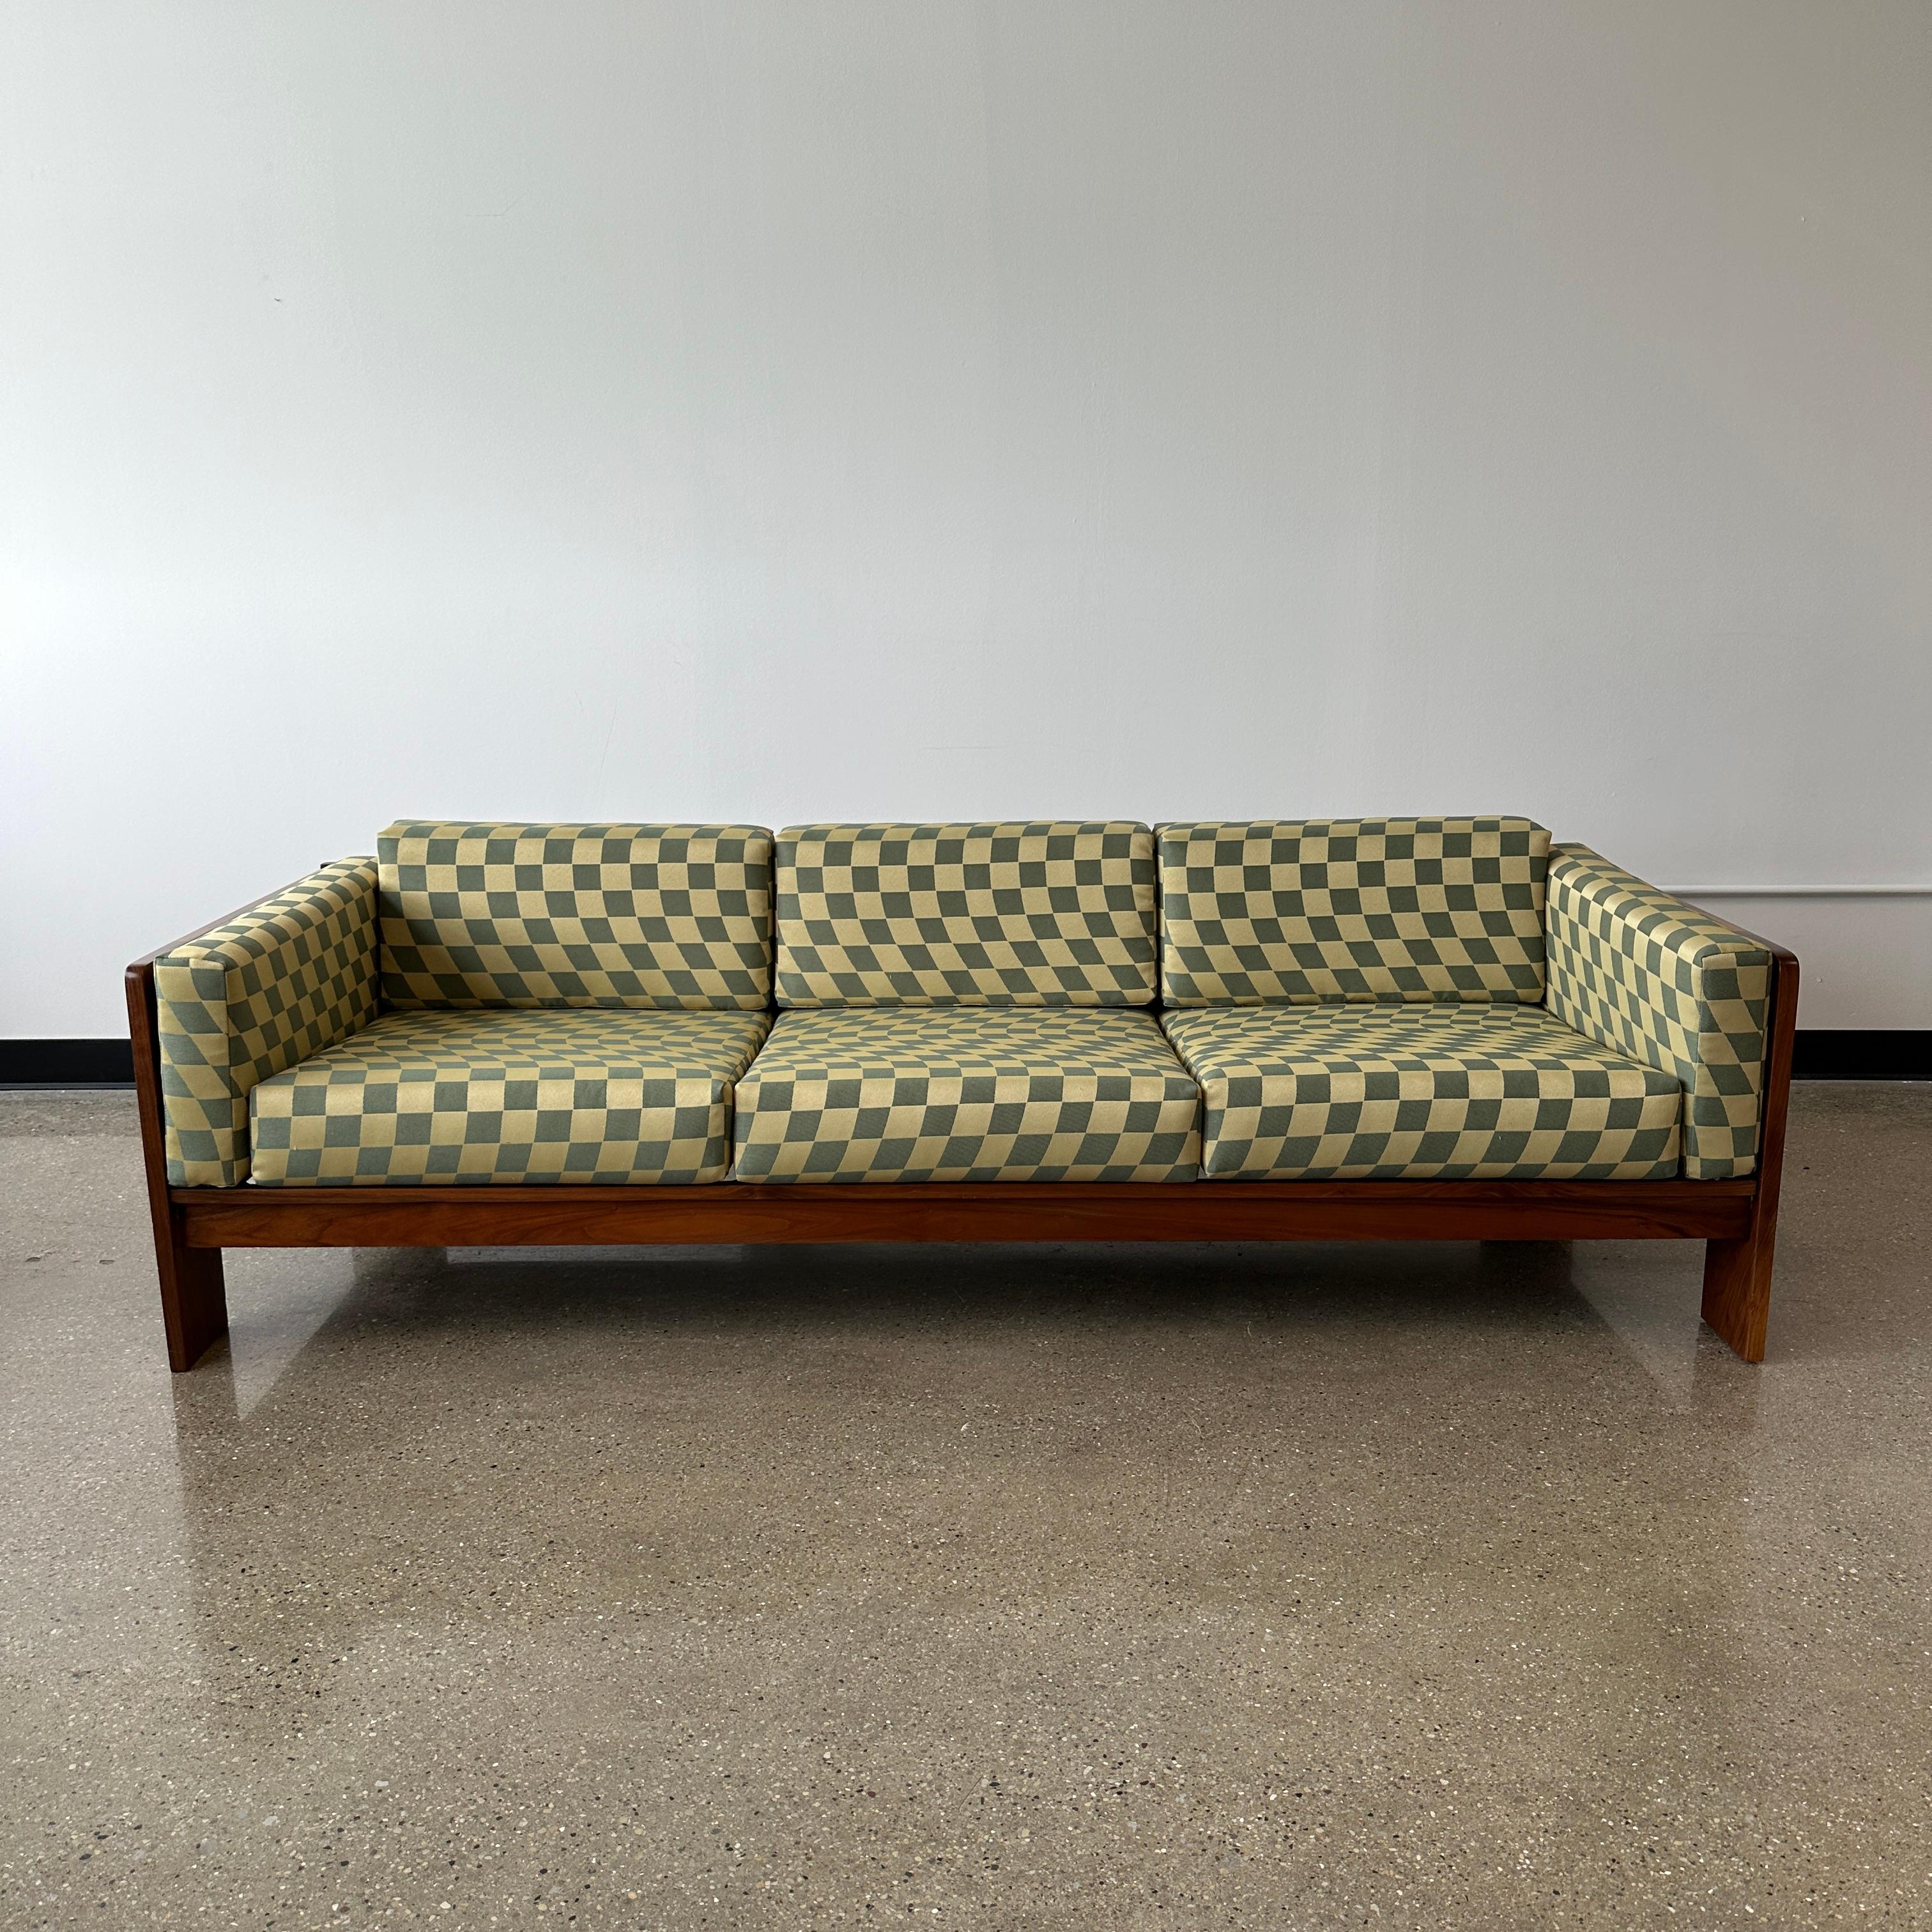 this piece has been fully refinished and restored. The cushions are new and it has been reupholstered in a vintage, dead stock wavy check fabric